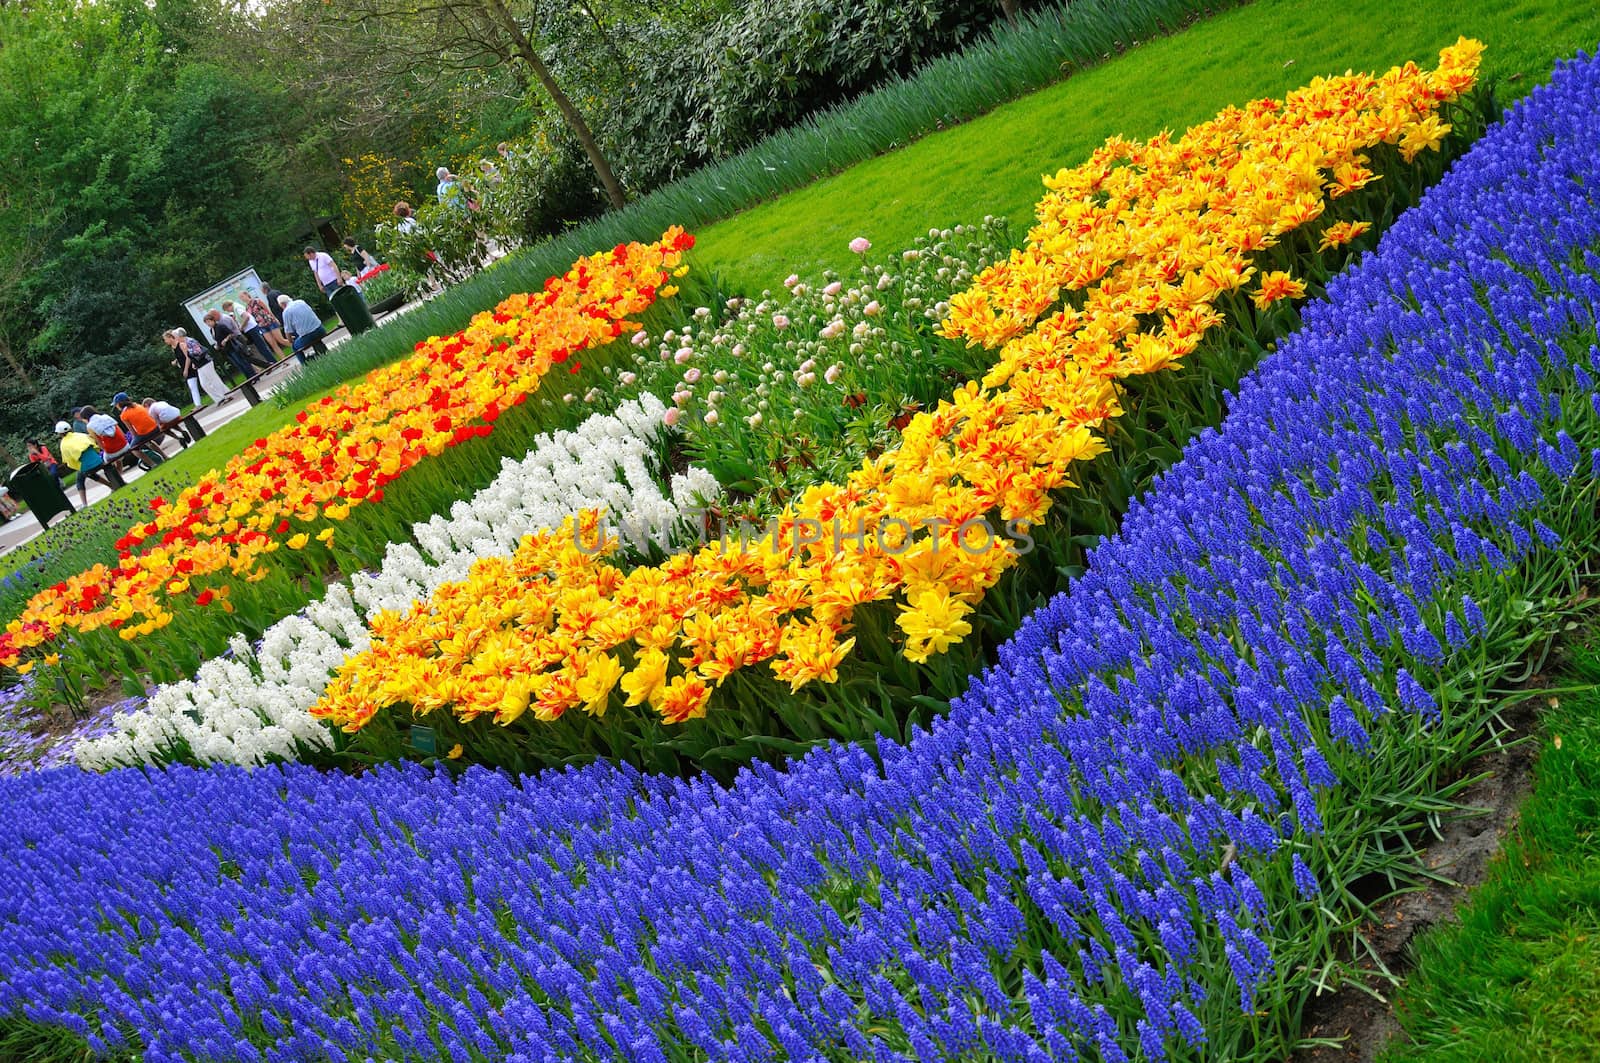 Red, orange, yellow, white and blue tulips in Keukenhof park in  by Eagle2308